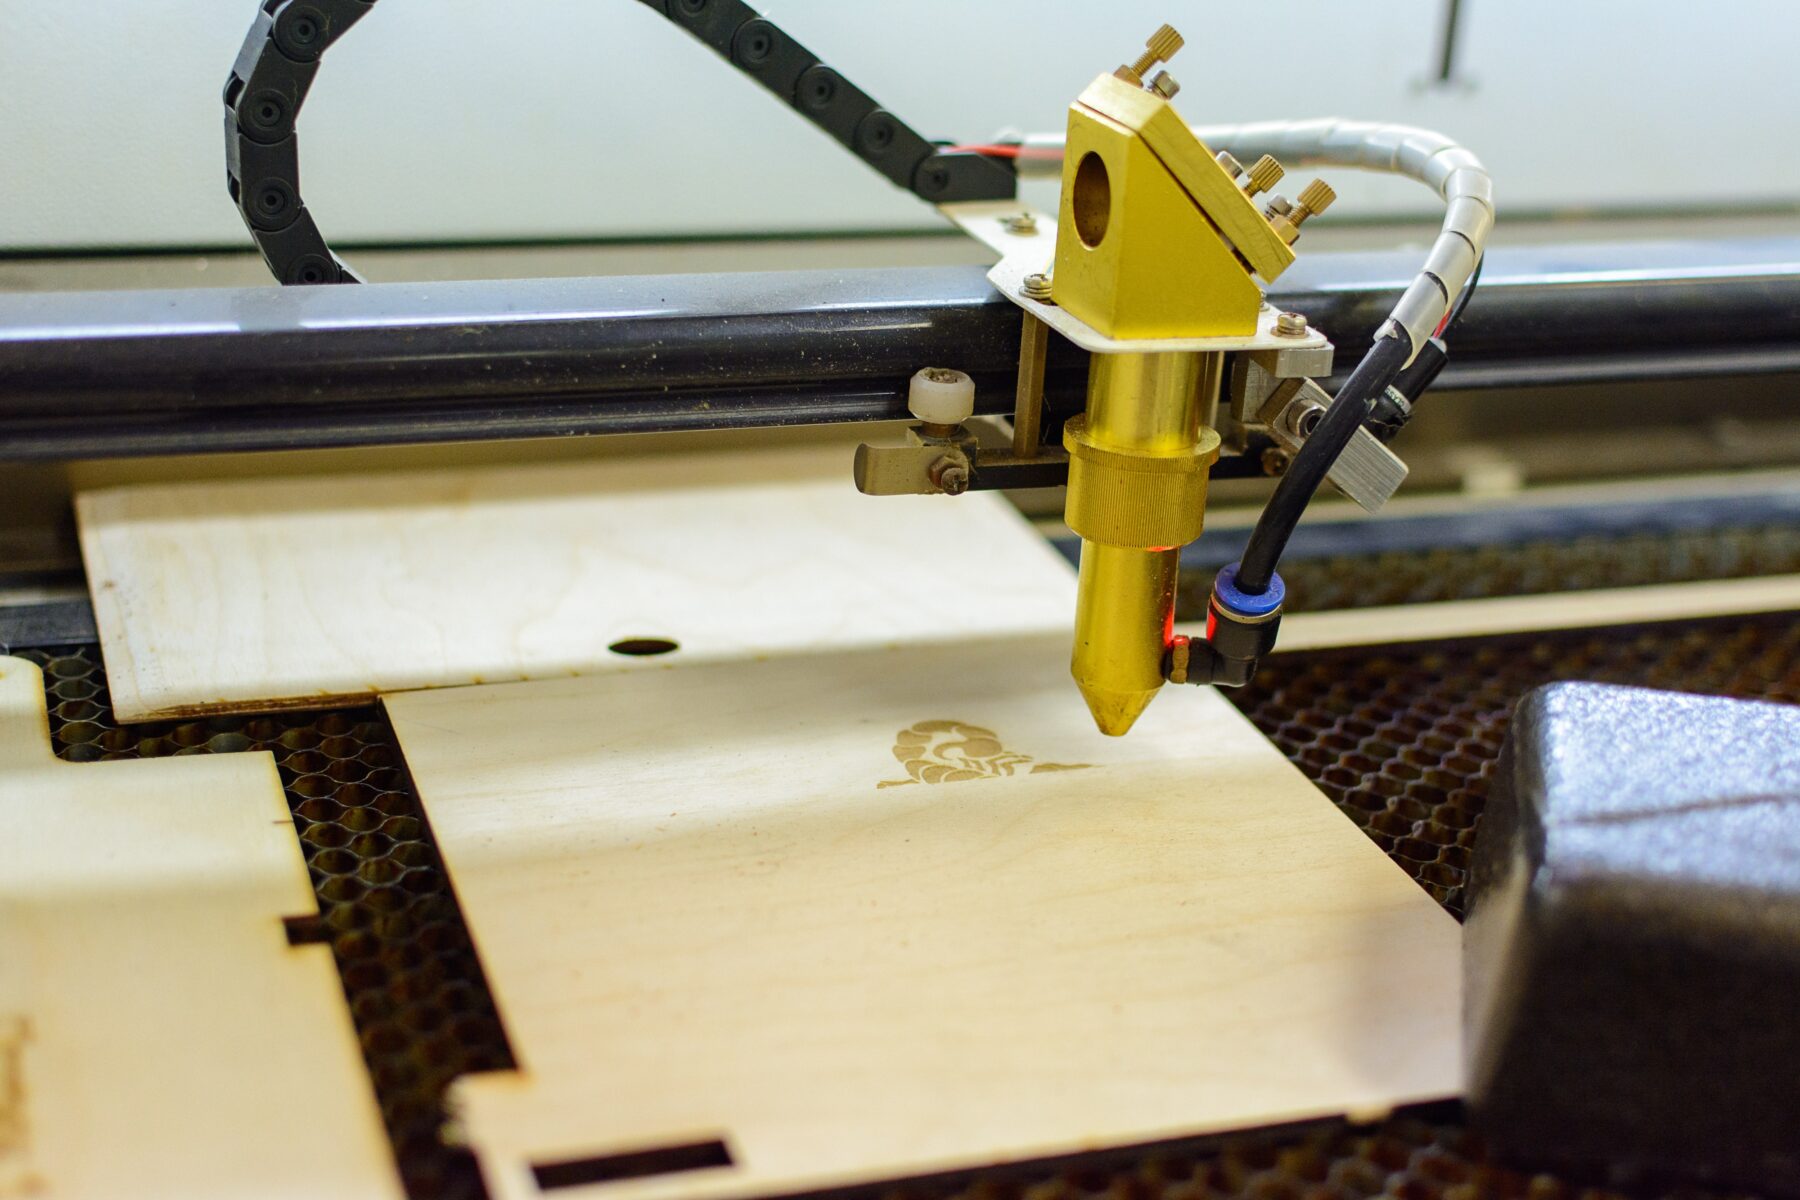 How to engrave wood with laser machine